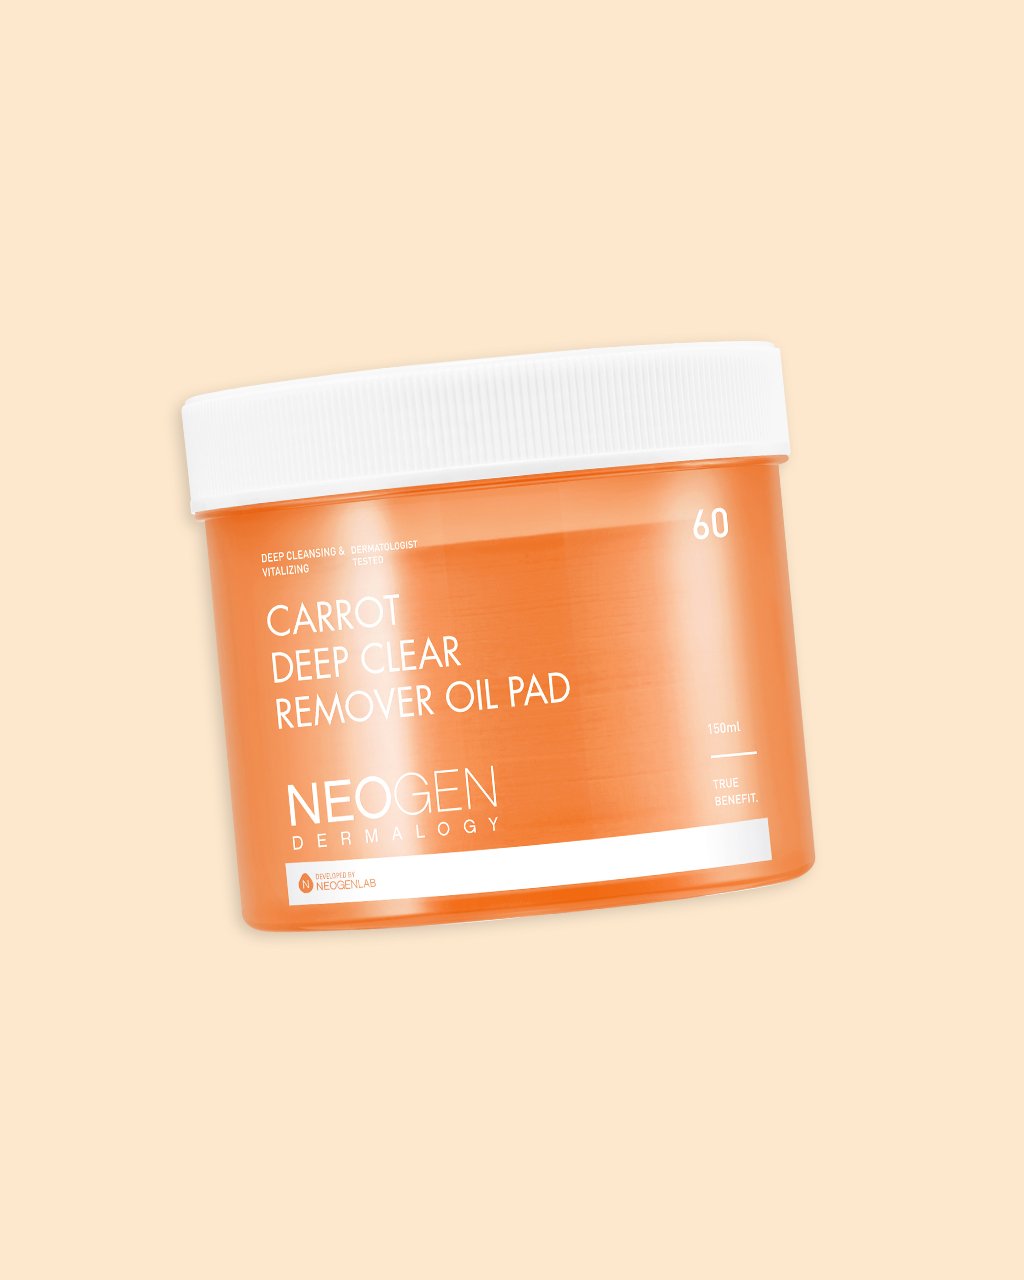 Carrot Deep Clear Remover Oil Pad Oil Cleanser NEOGEN 